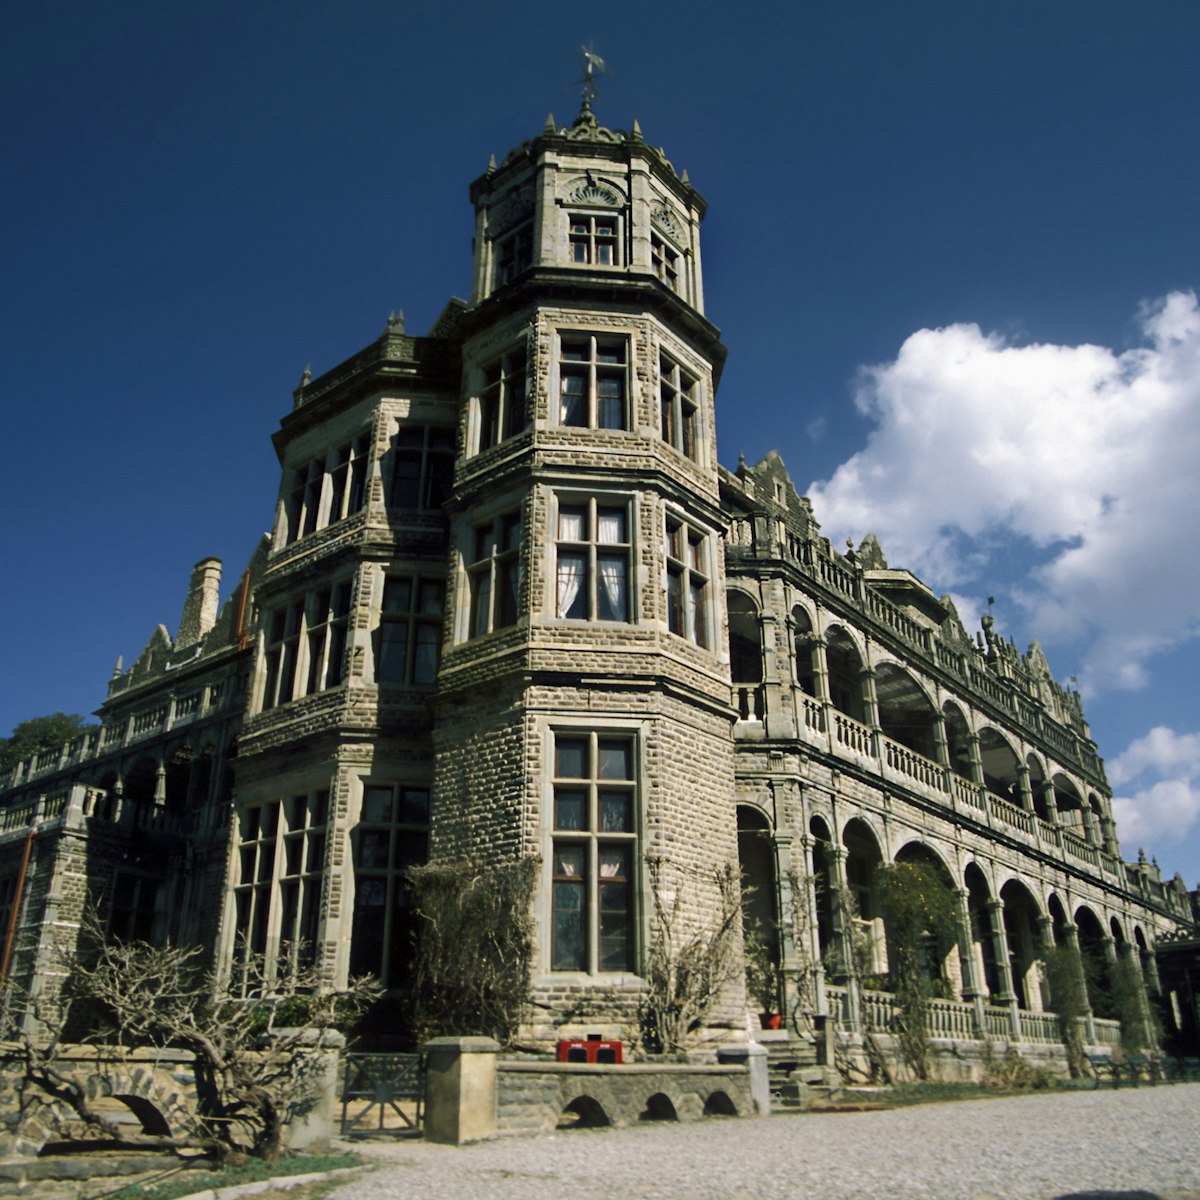 Viceregal Lodge is the official residence of a Viceroy, Shimla, Himachal Pradesh, India . (Photo by: IndiaPictures/UIG via Getty Images)